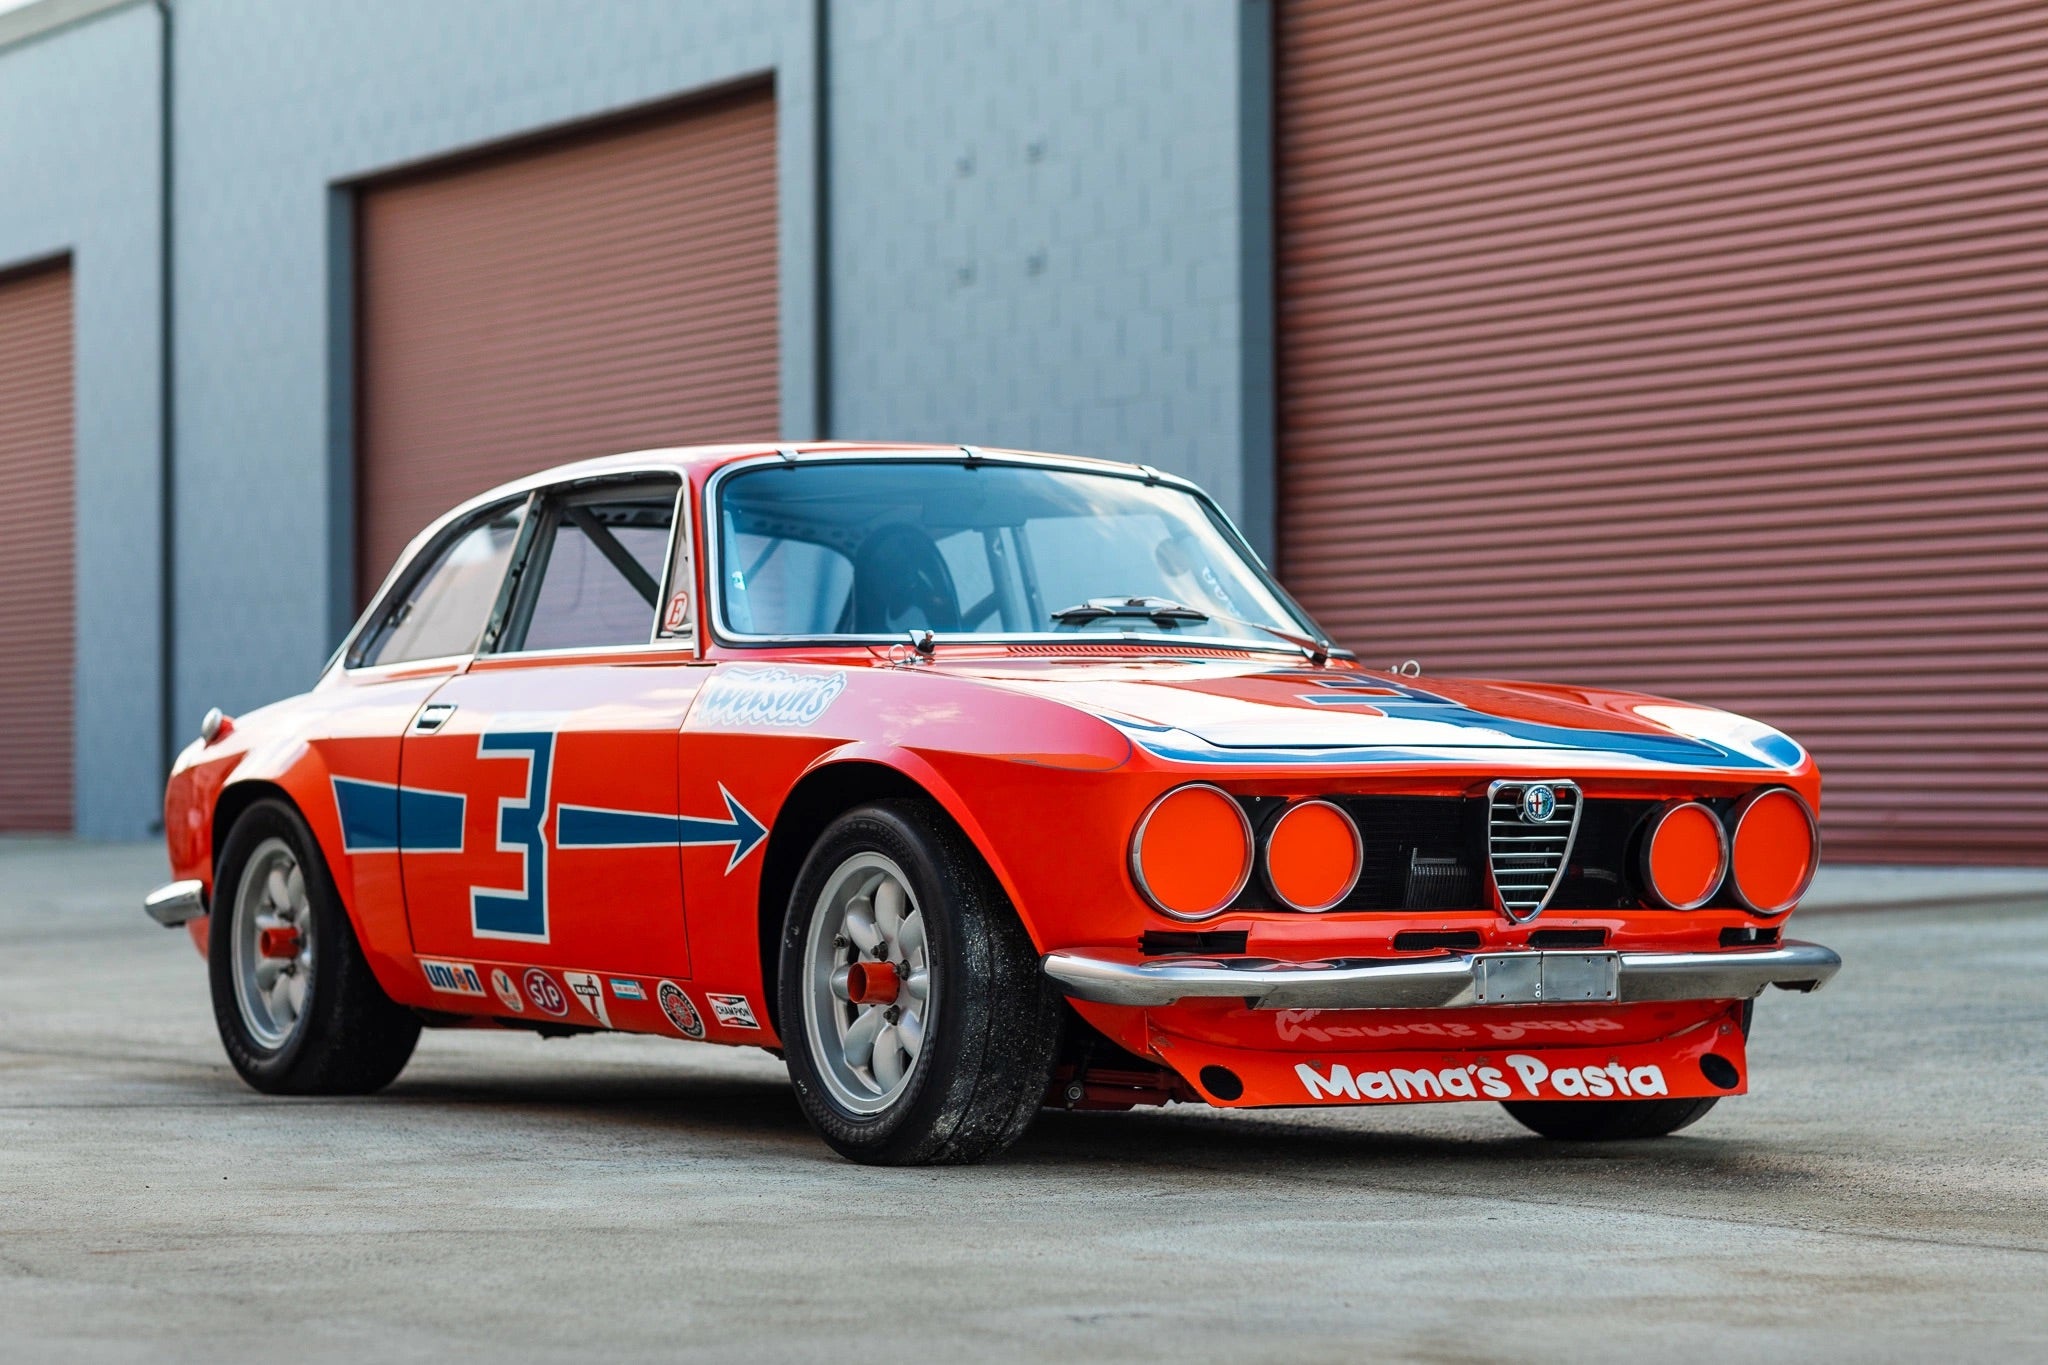 You Can Buy This 1971 Alfa Romeo GTV Racer, but It’ll Take More Than $350K